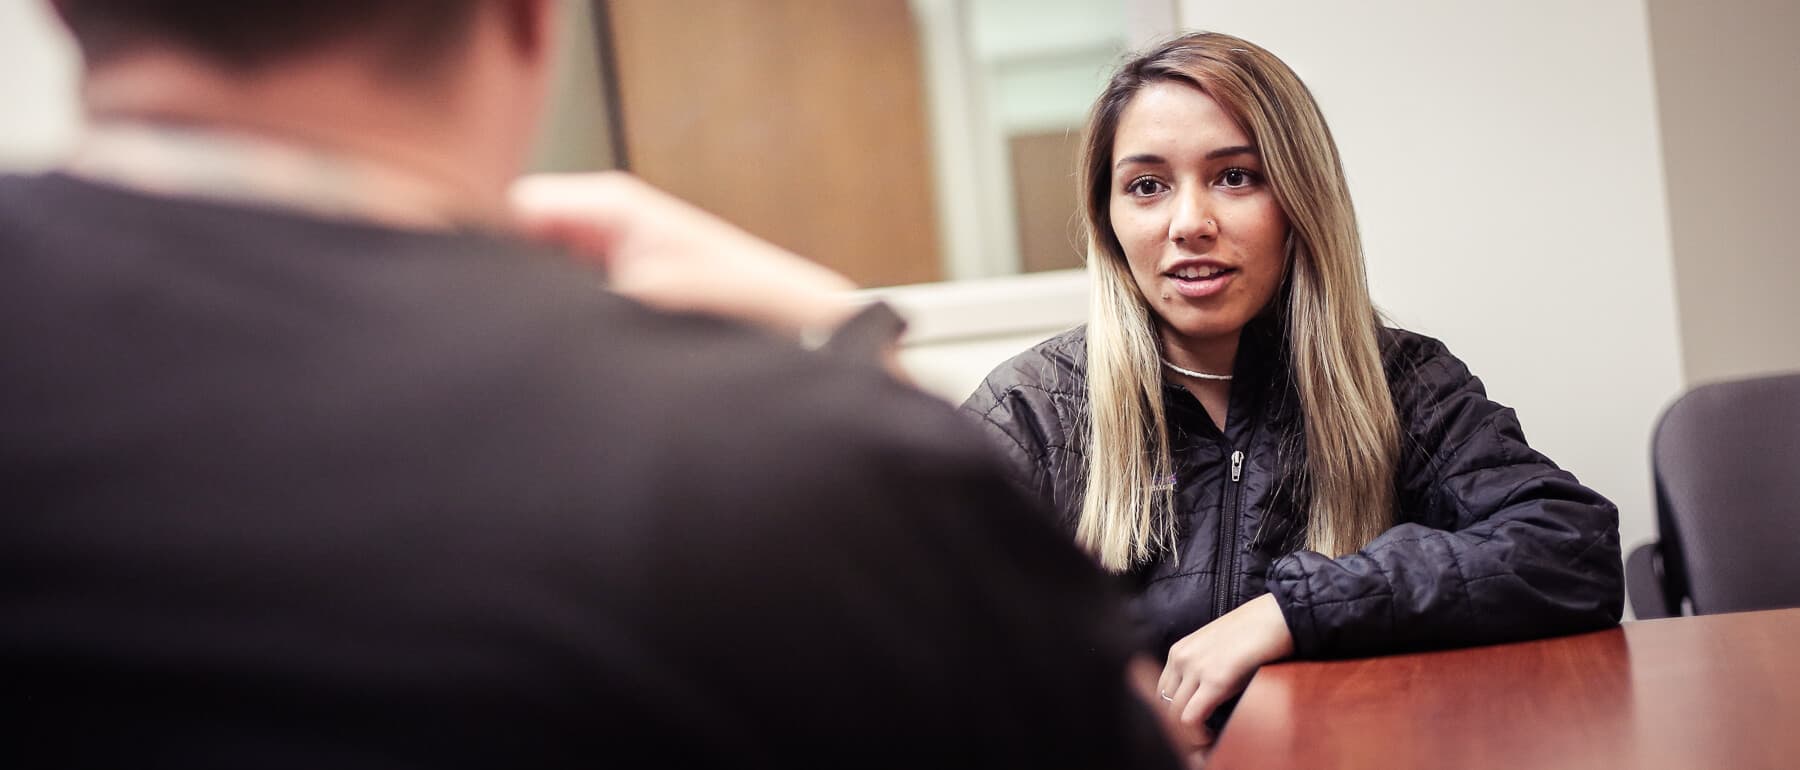 A UWGB student partakes in mock counseling for a Social Work class.